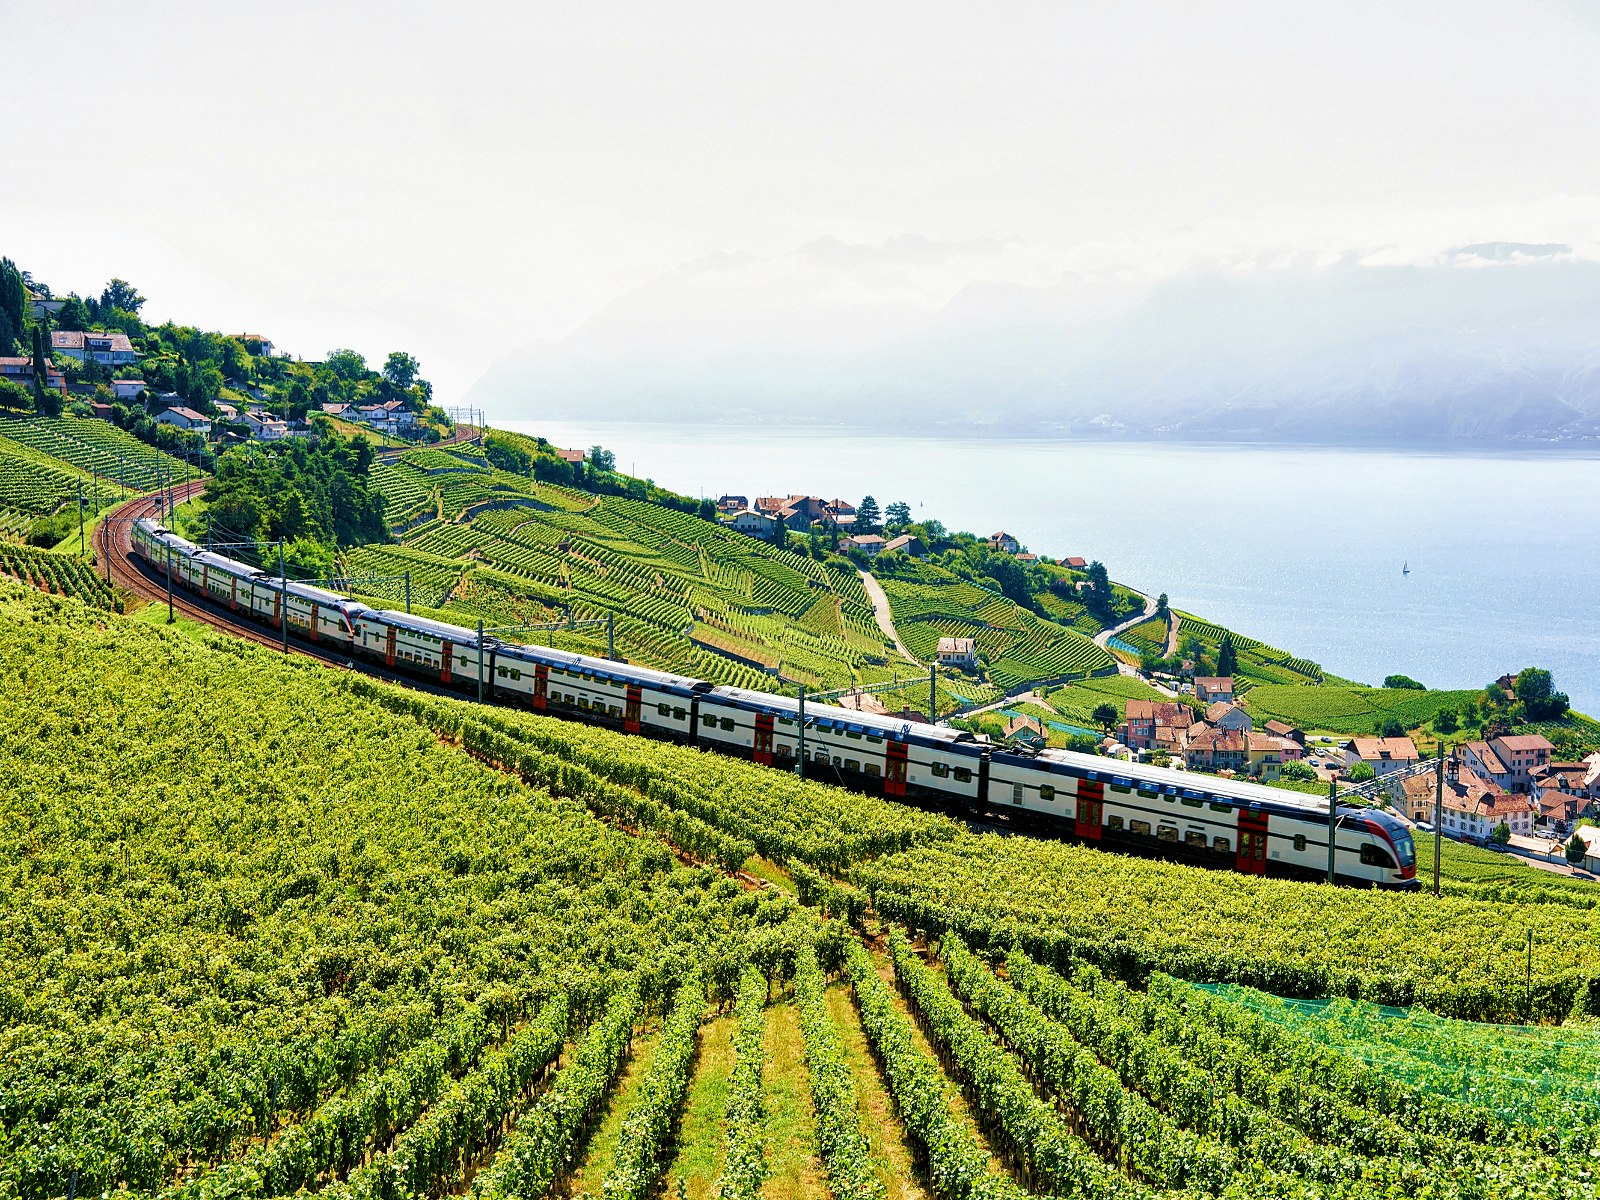 Trains and hiking routes pass through picturesque Lavaux vineyards